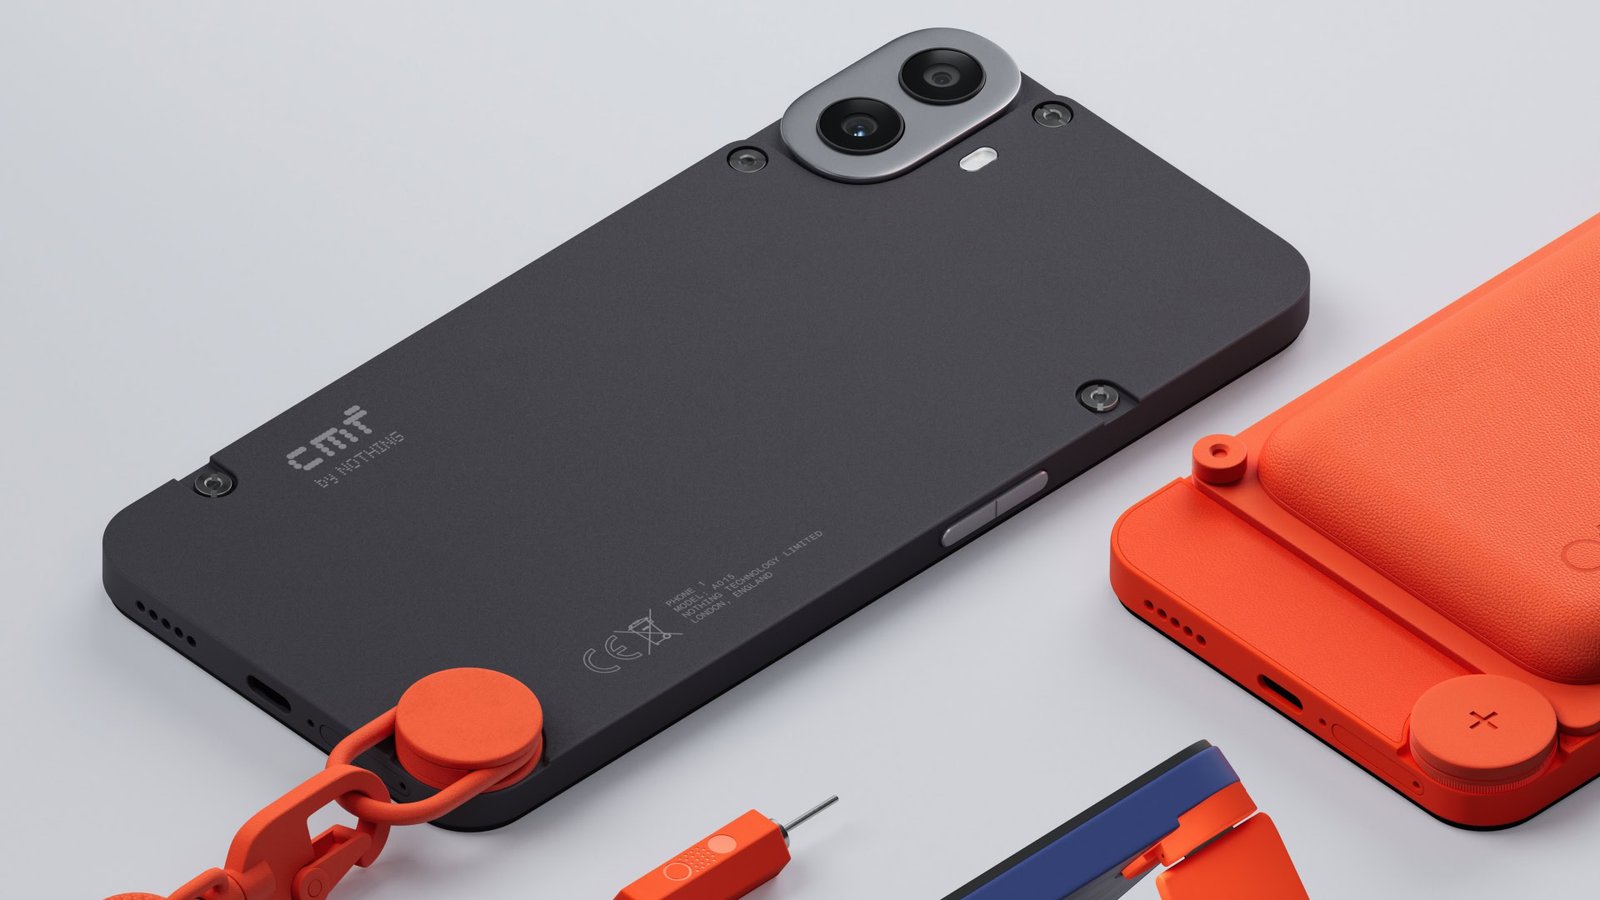 Here’s our best look at the CMF Phone 1 with all its accessories